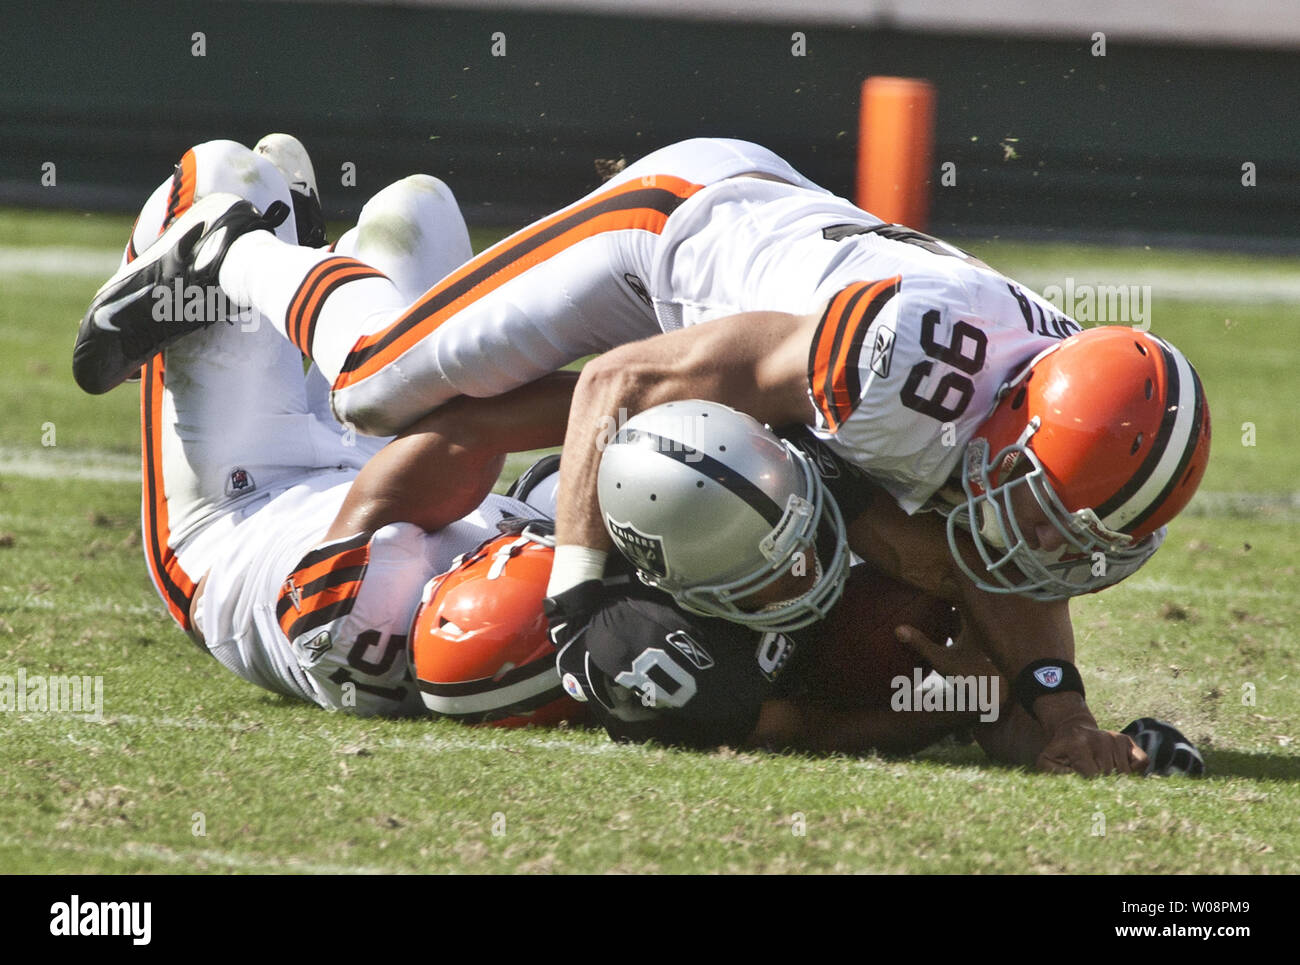 Oakland Raiders QB Jason Campbell (8) is tackled by Cleveland Browns Chris Gocong (51) and Scott Fujita (99) in a play that resulted in Campbell breaking his collarbone at the Coliseum in Oakland, California on October 16, 2011. The Raiders defeated the Browns 24-17.     UPI/Terry Schmitt Stock Photo